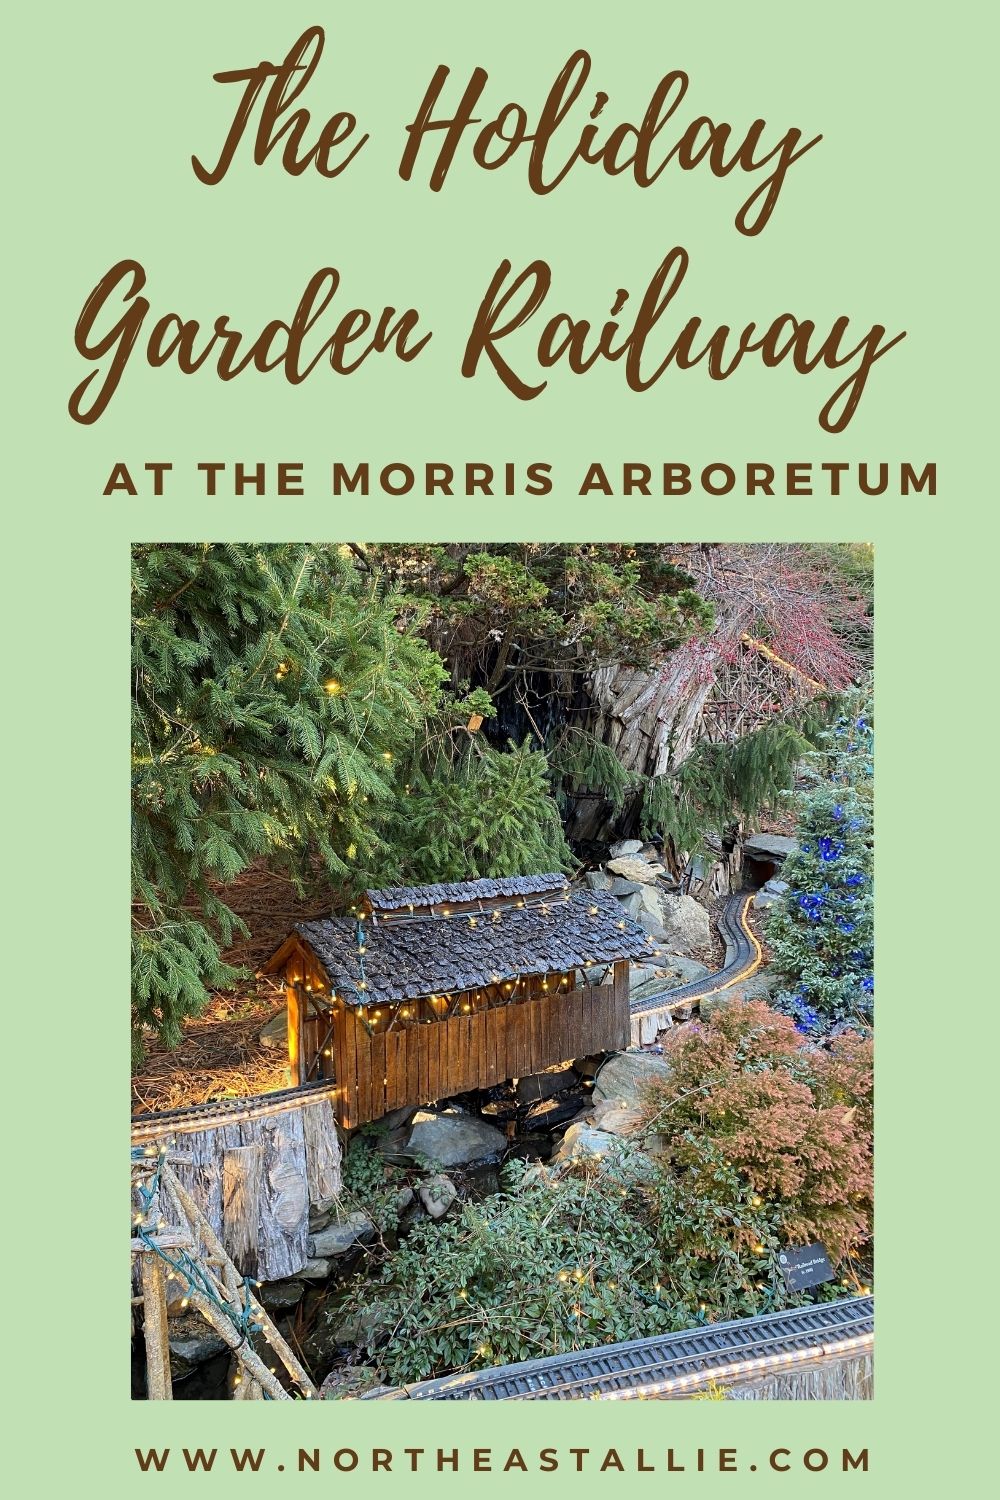 The Holiday Garden Railway At The Morris Arboretum